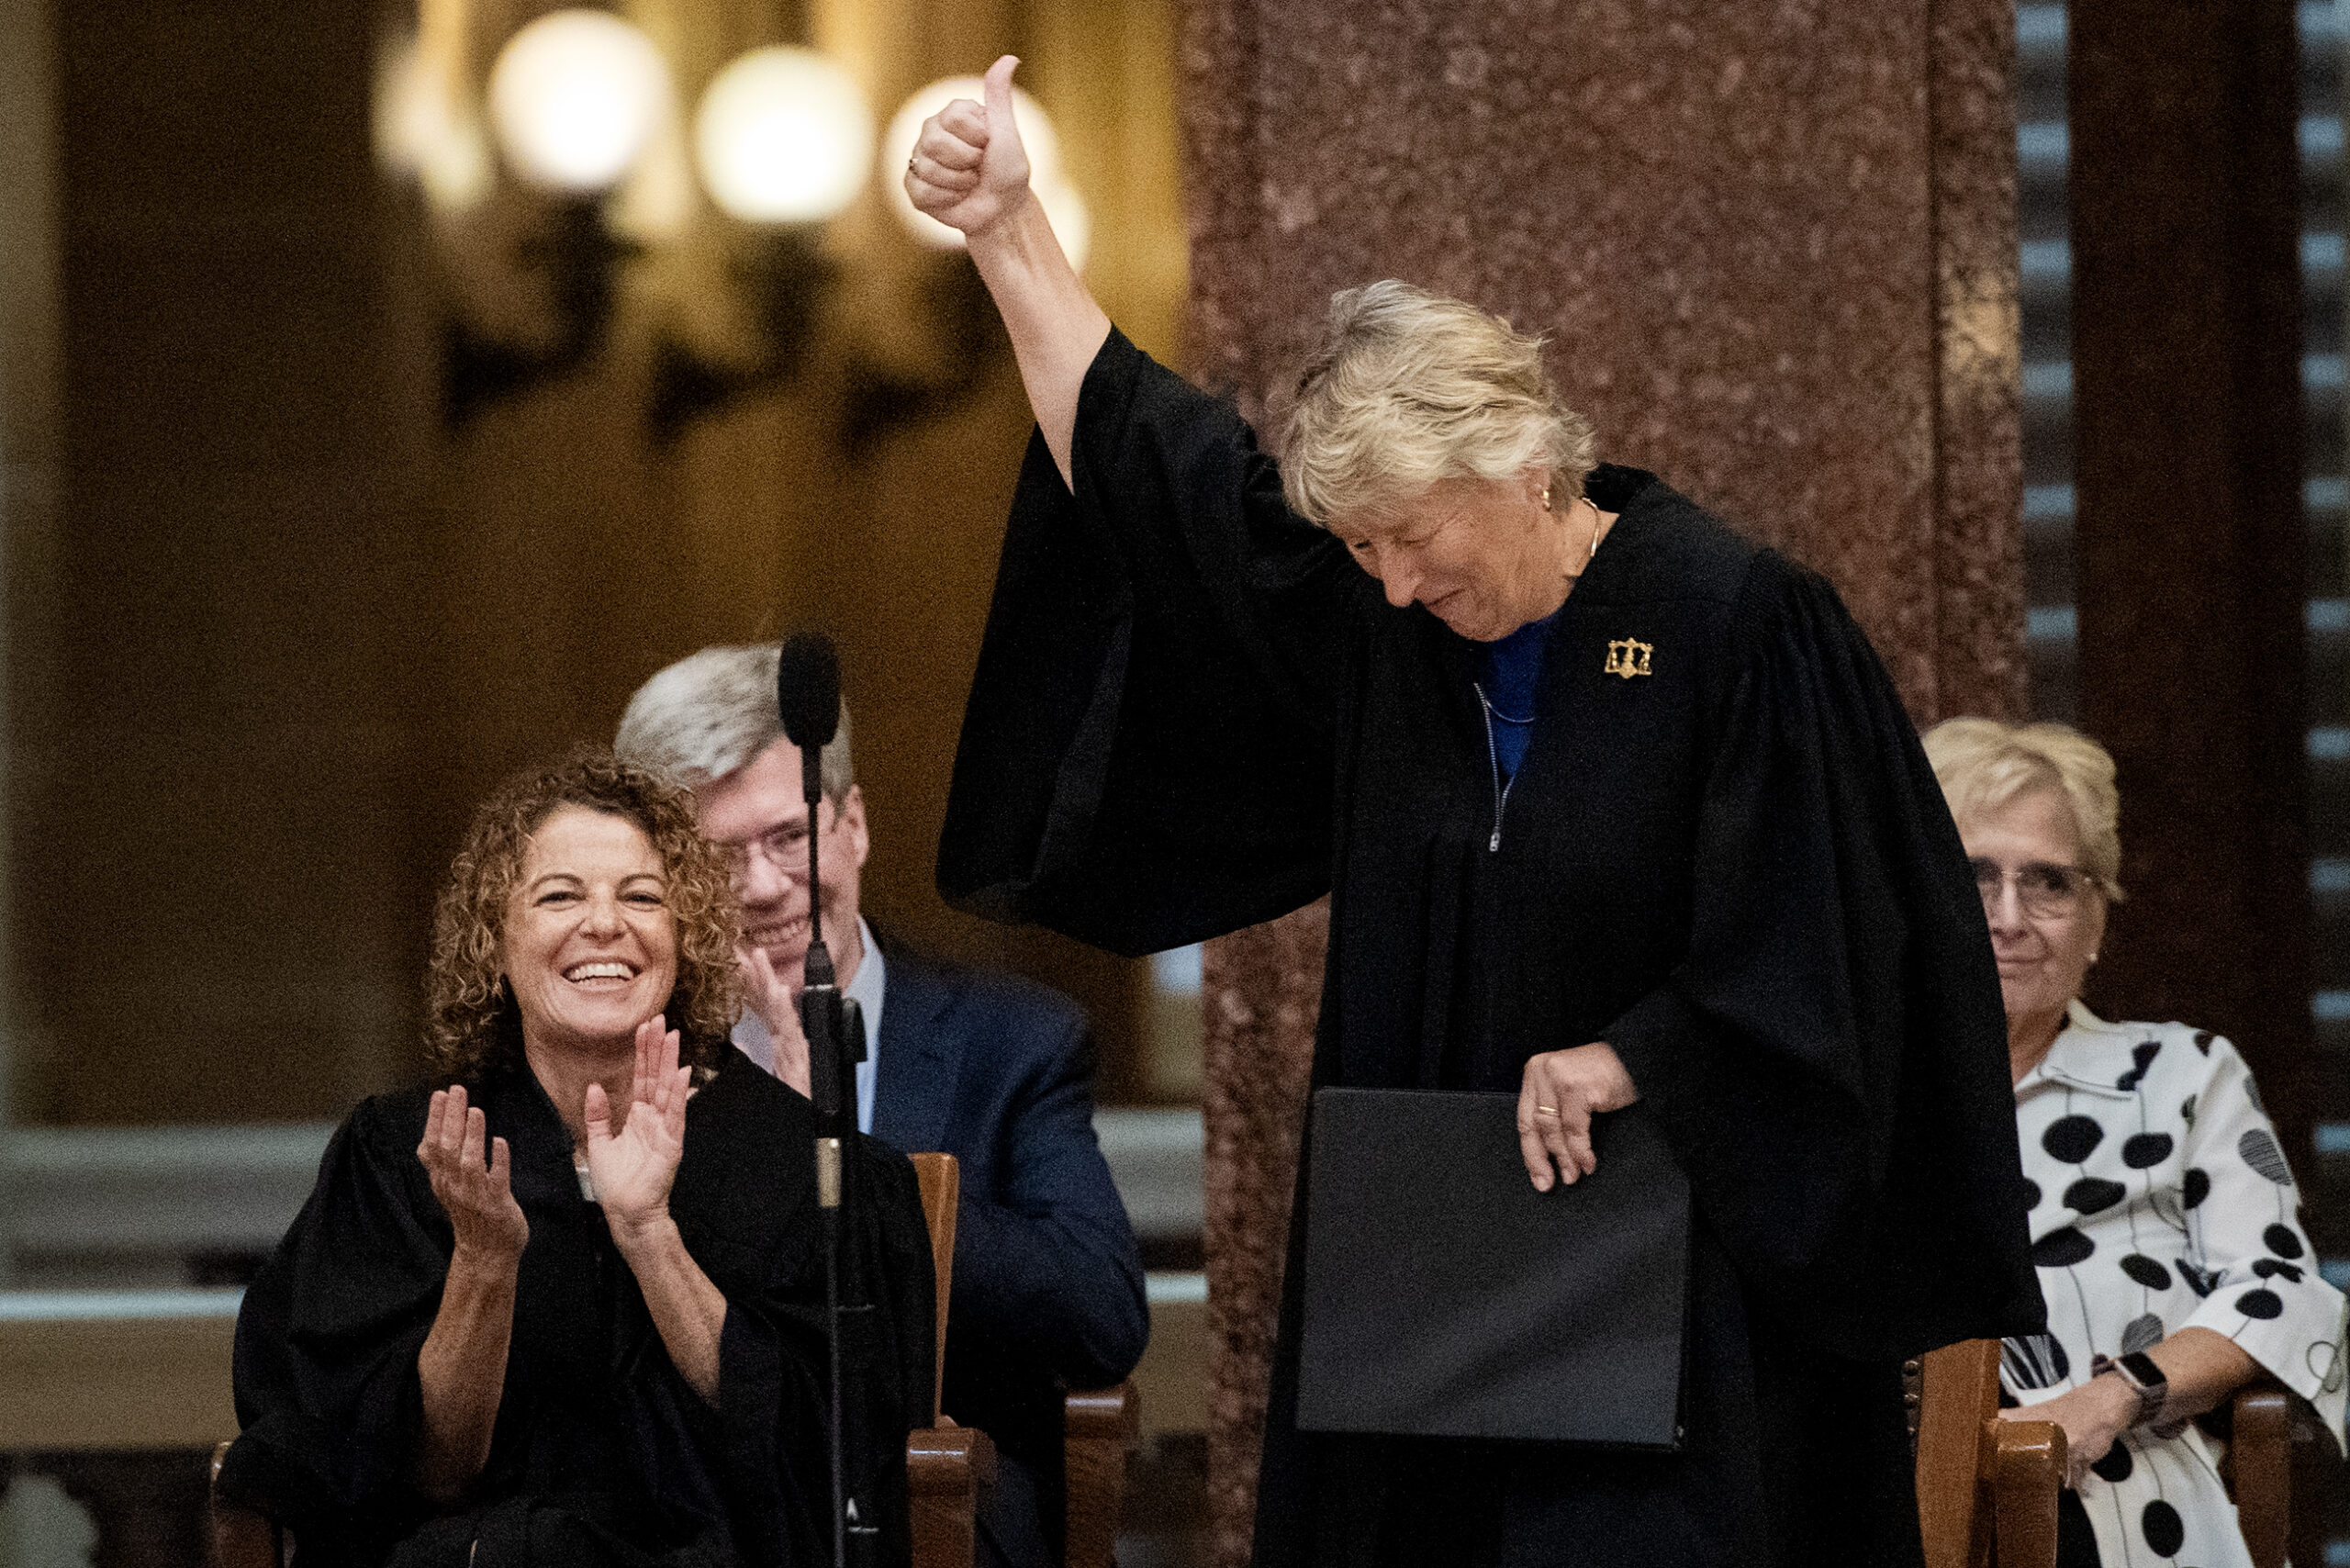 Liberal Supreme Court Justice Ann Walsh Bradley will not seek reelection